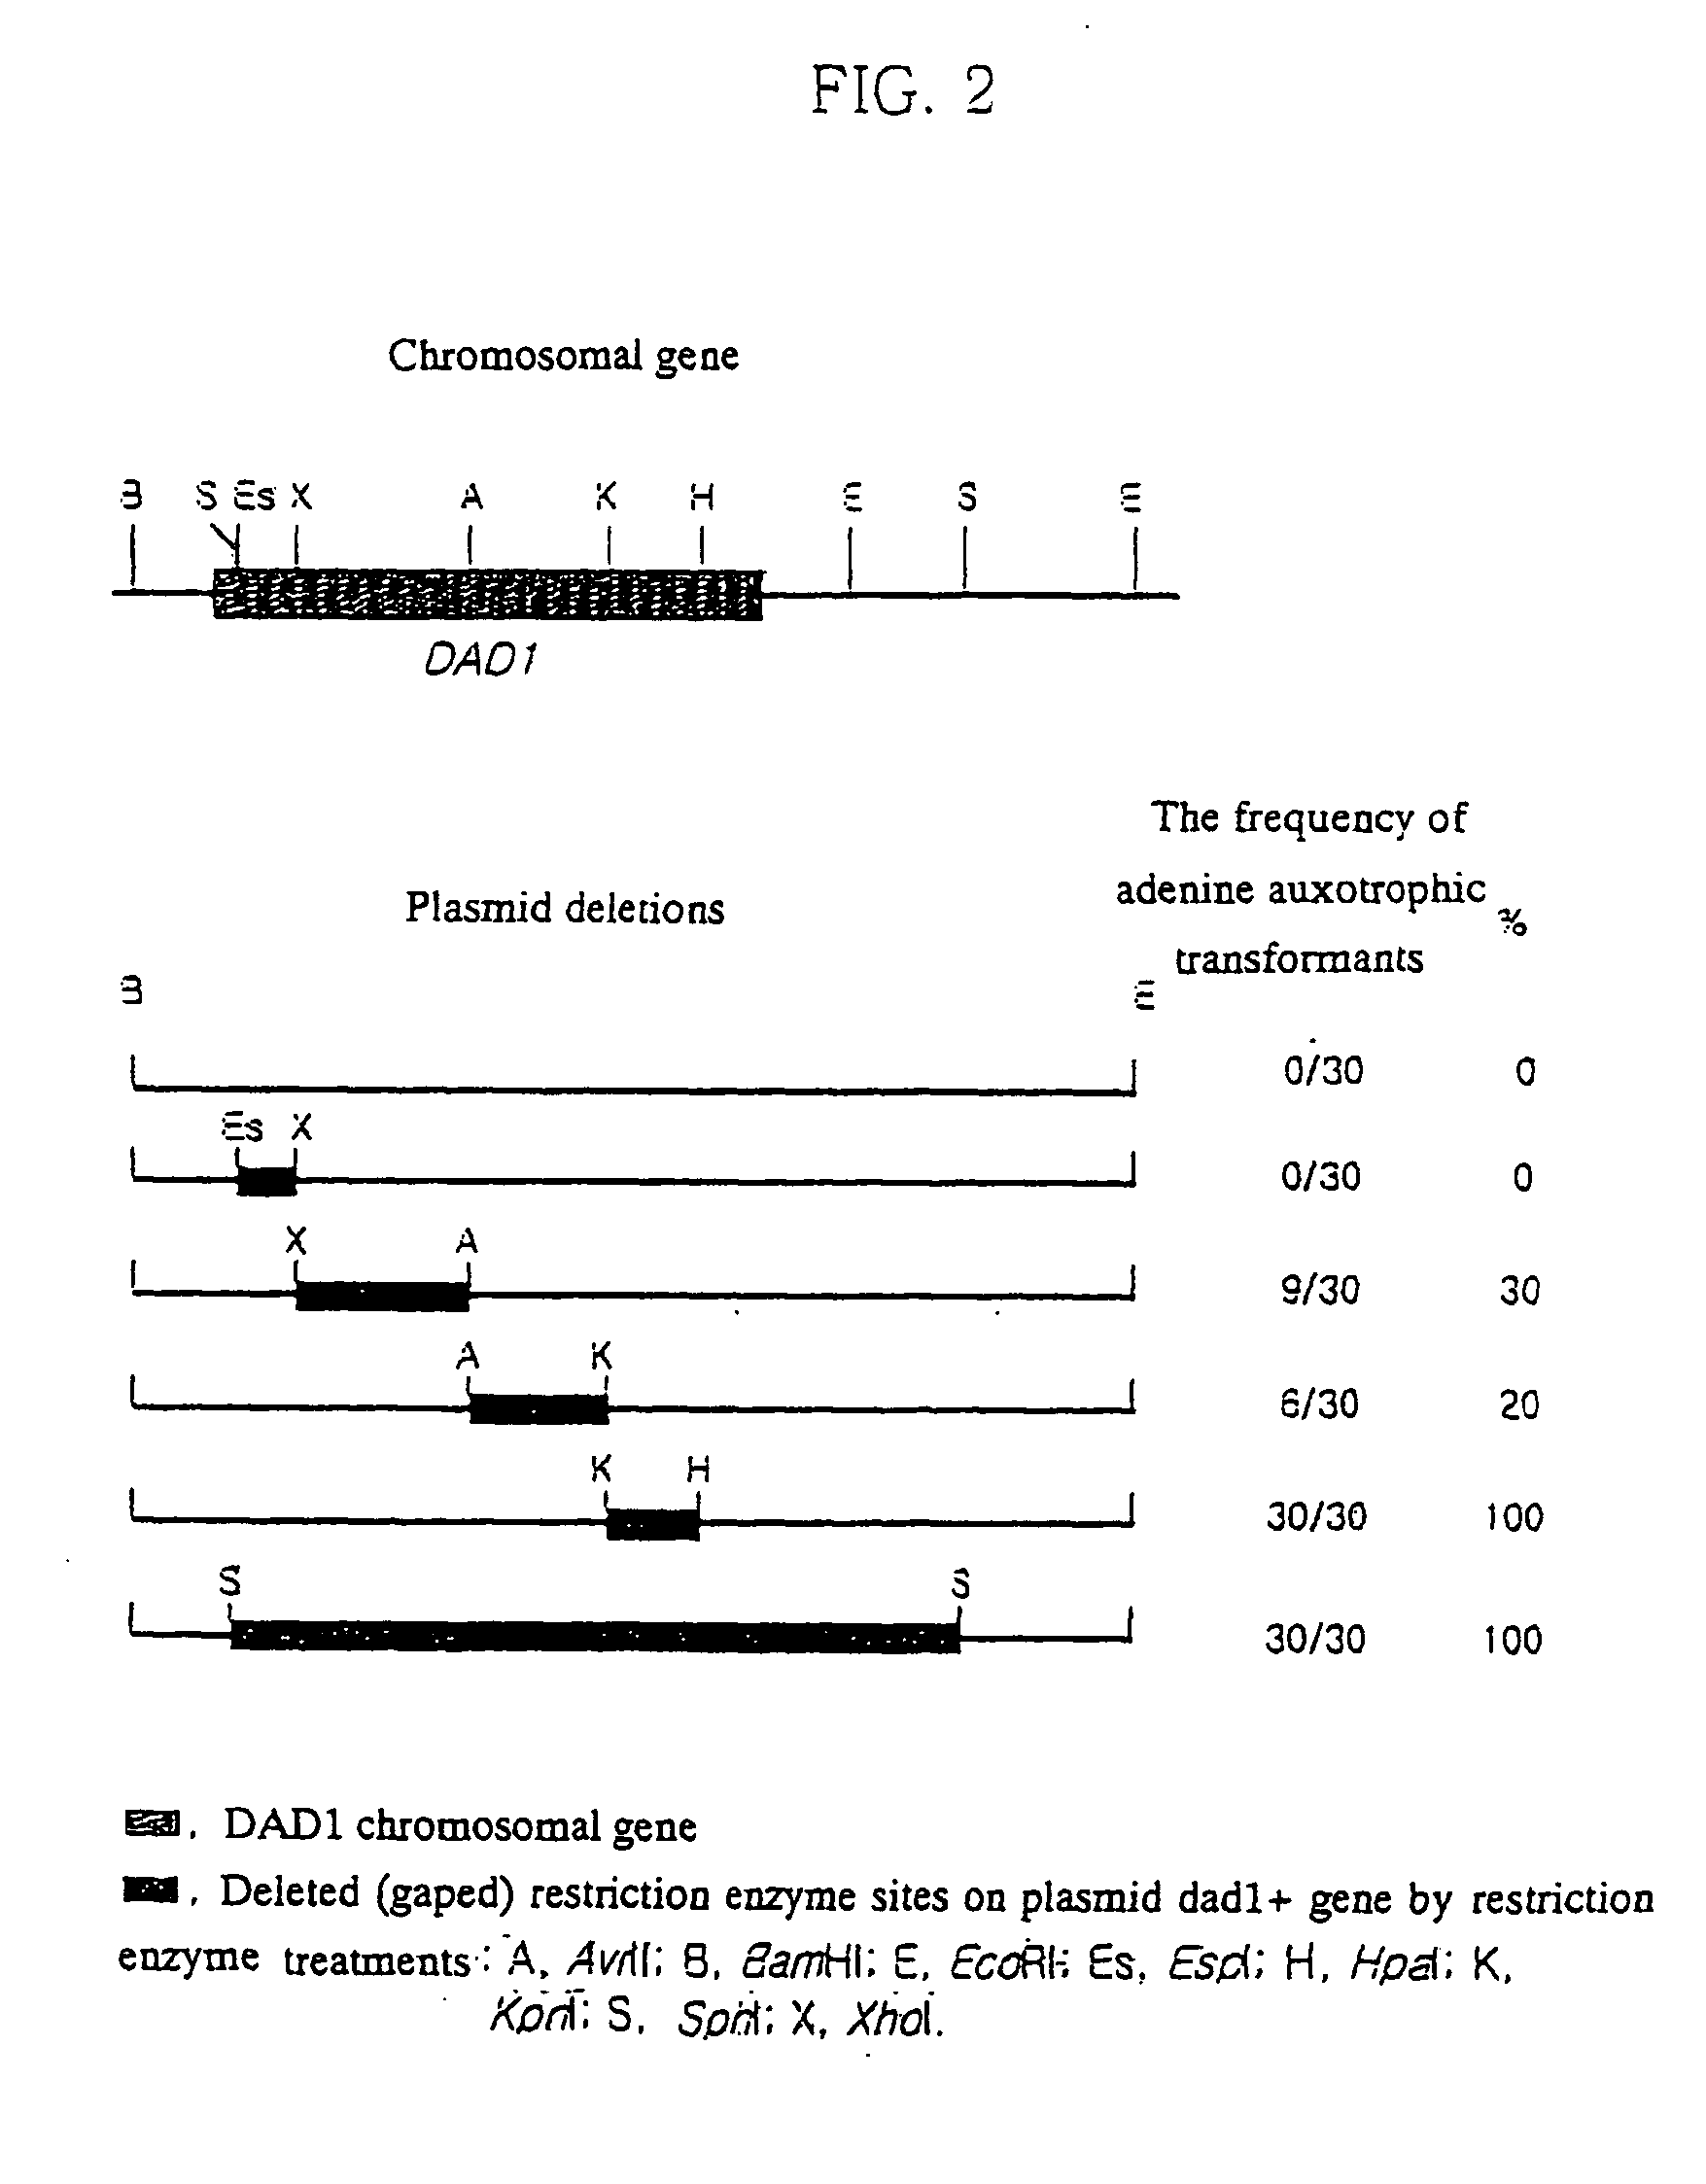 Yeast transformation vector containing auxotrophic dominant gene yeast transfomant containing it and their preparation